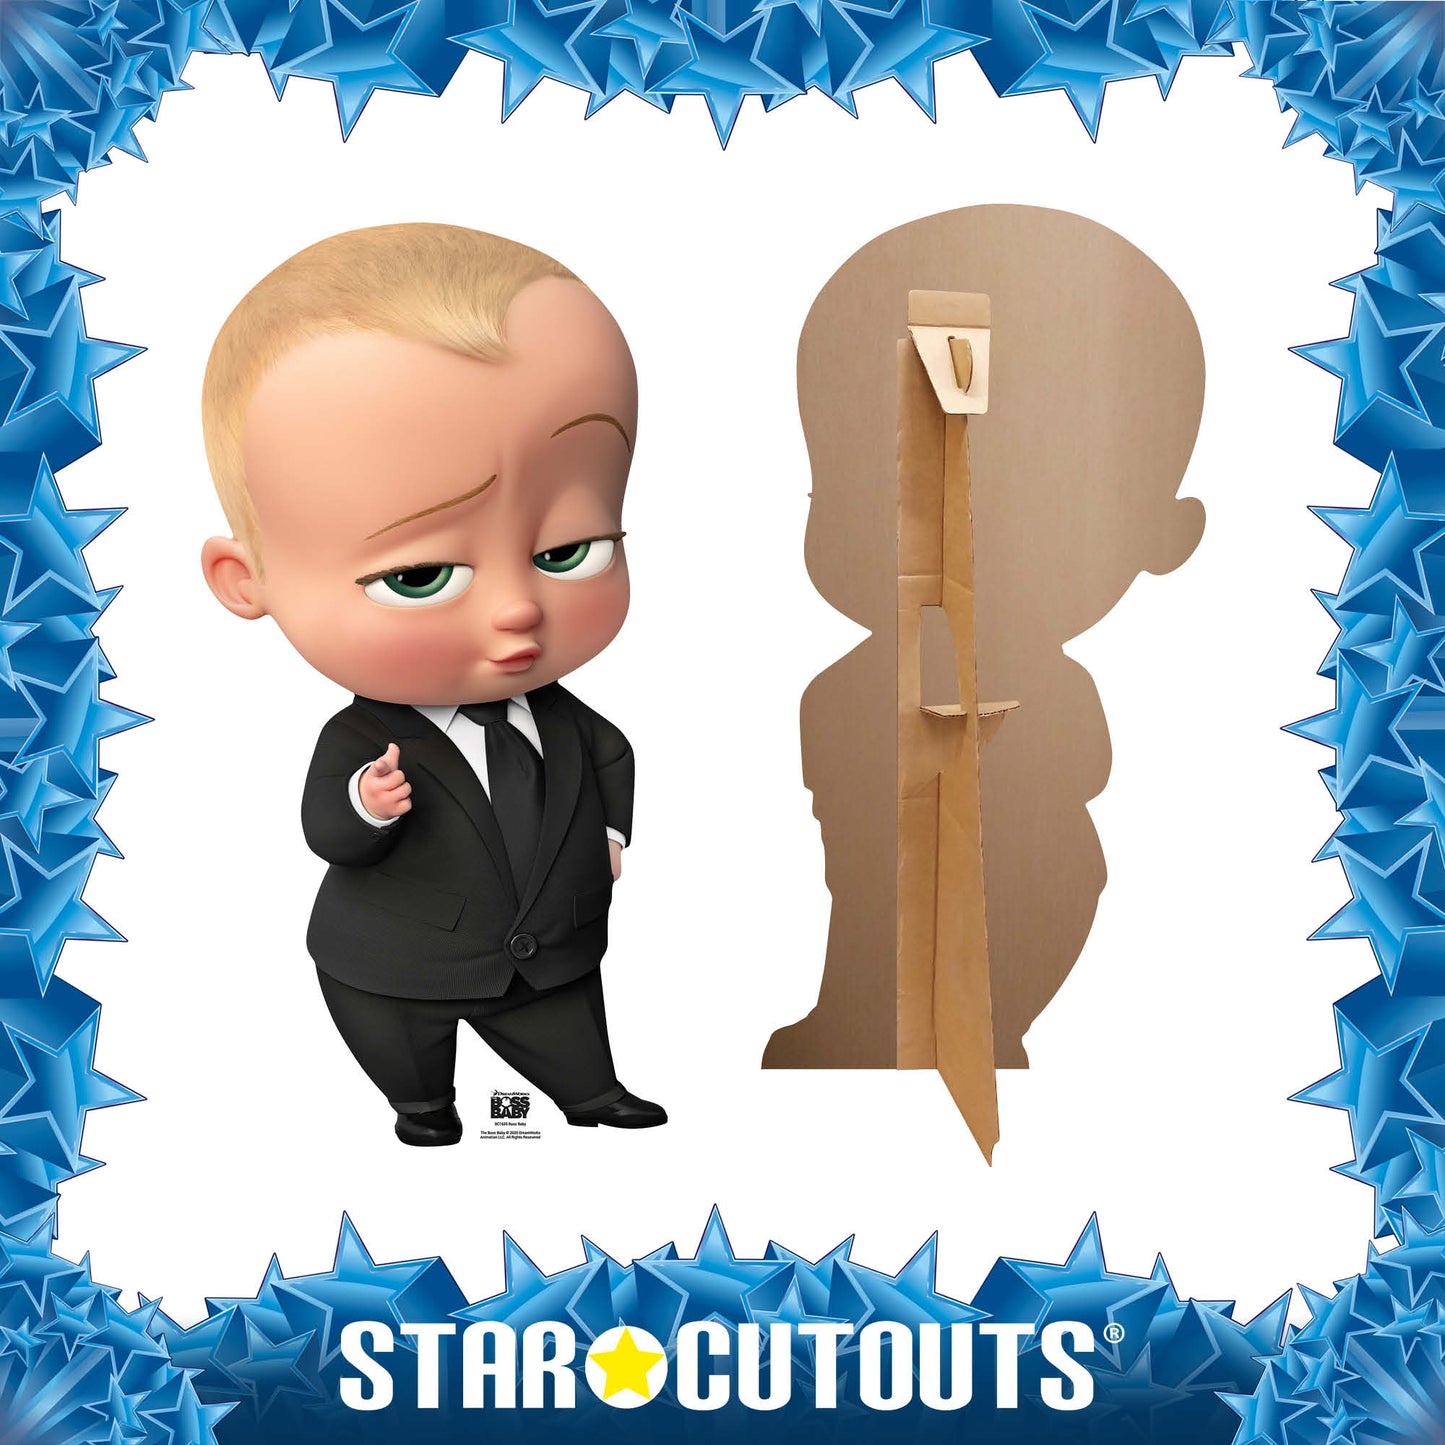 SC1635 Boss Baby Cardboard Cut Out Height 89cm - Star Cutouts